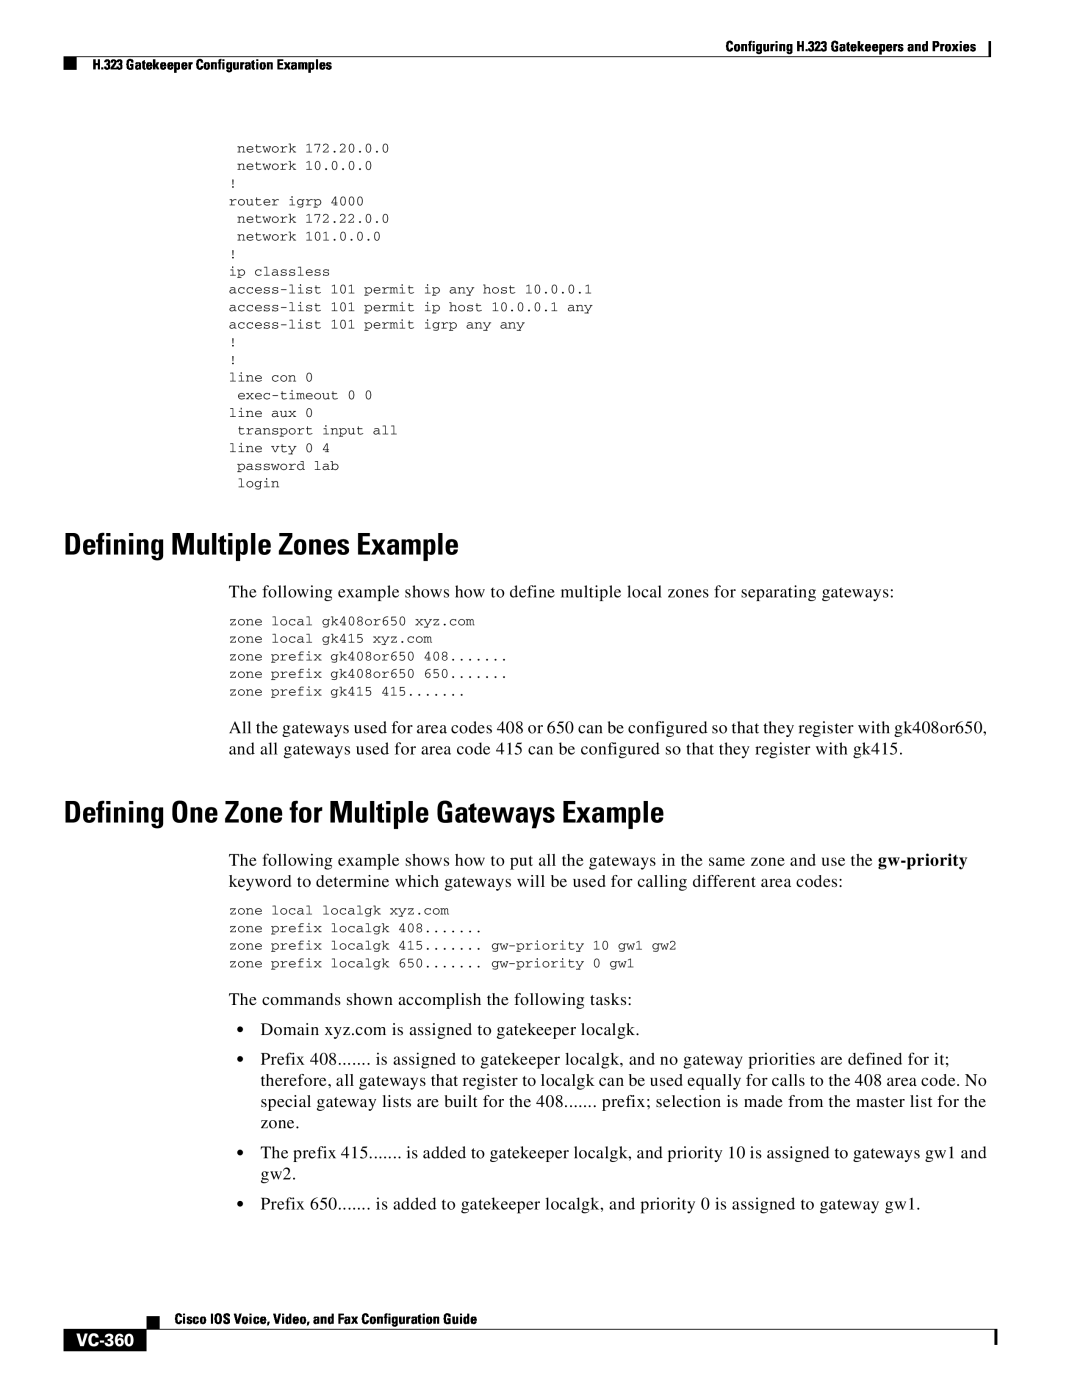 Cisco Systems VC-289 manual Defining Multiple Zones Example, Defining One Zone for Multiple Gateways Example, VC-360 